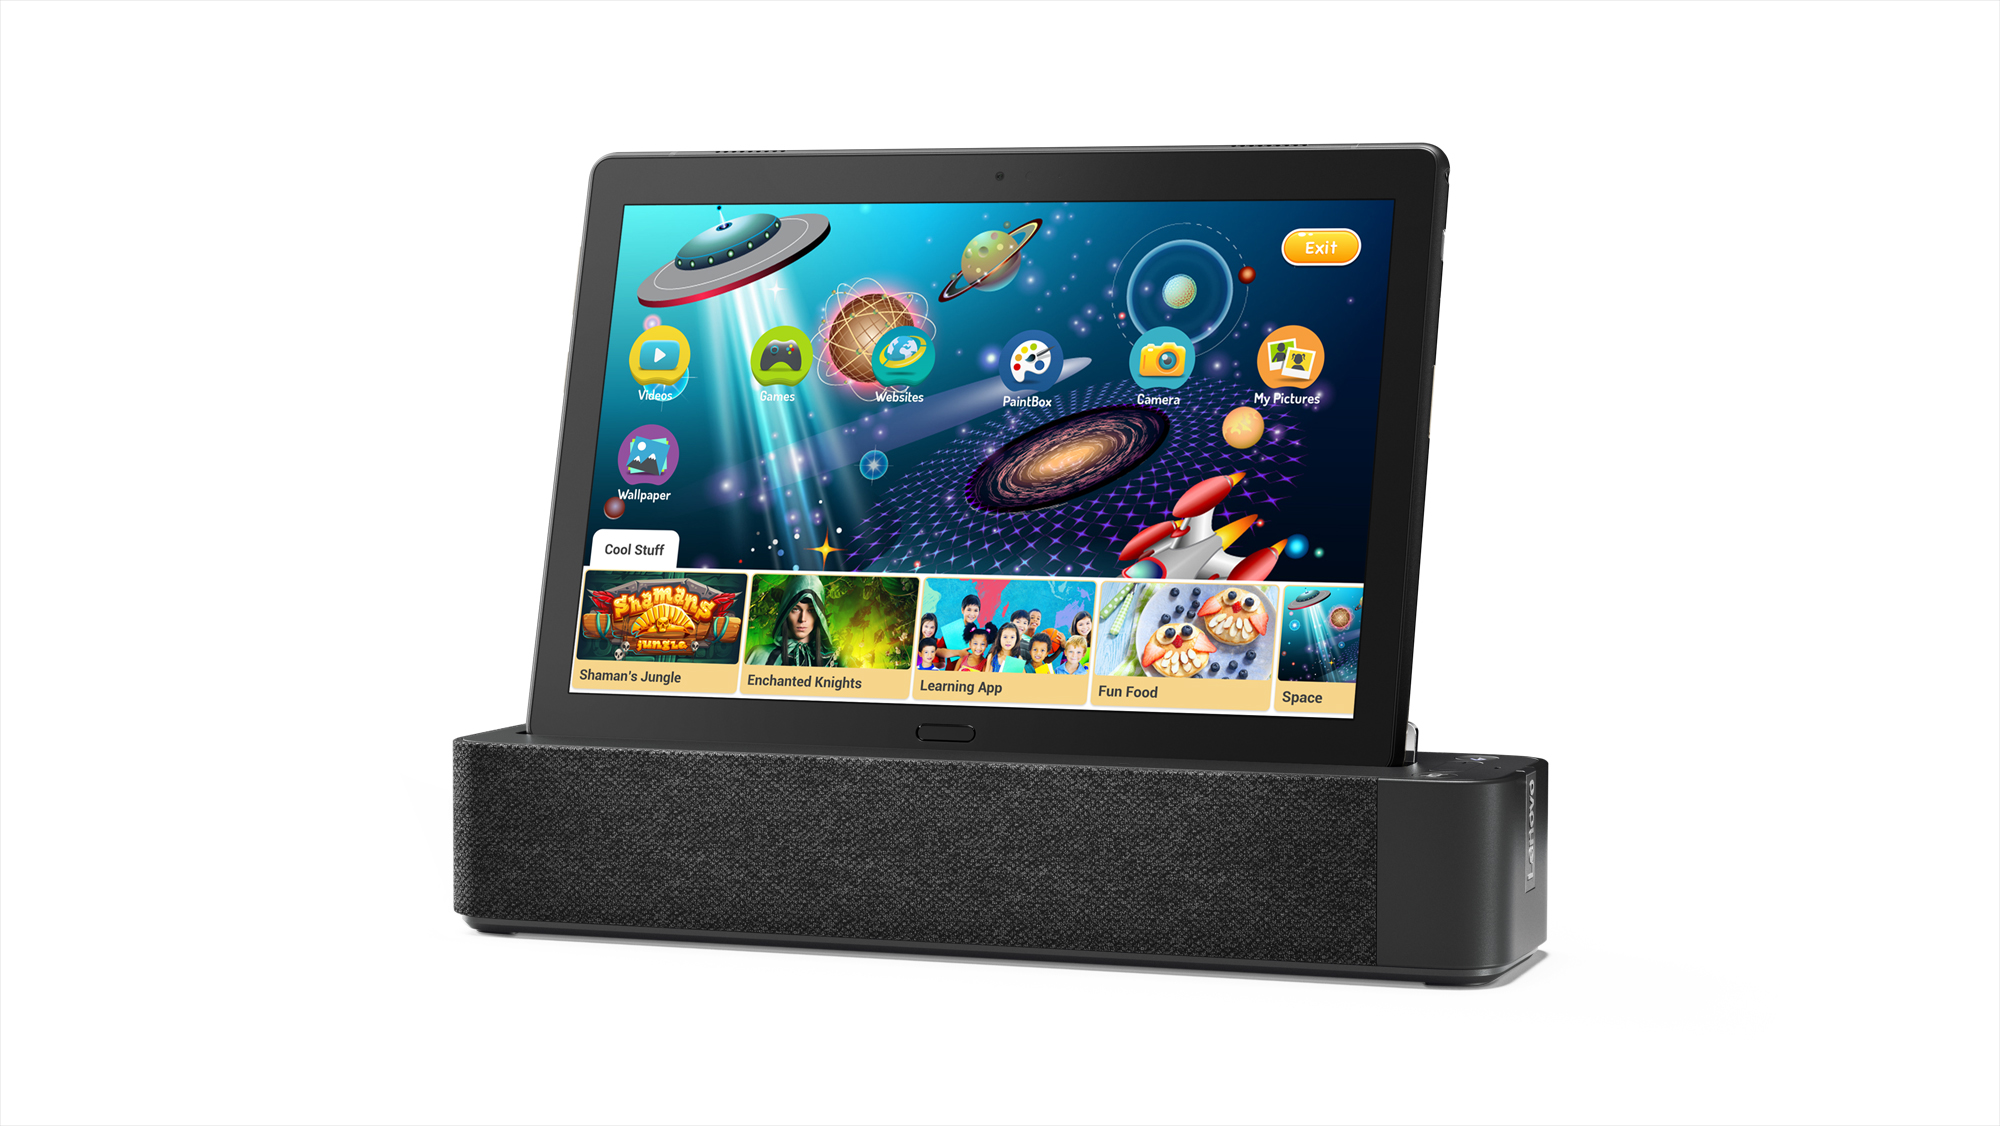 lenovo ces 2019 announcements 12 smart tab p10 with dock hero docked kid s room